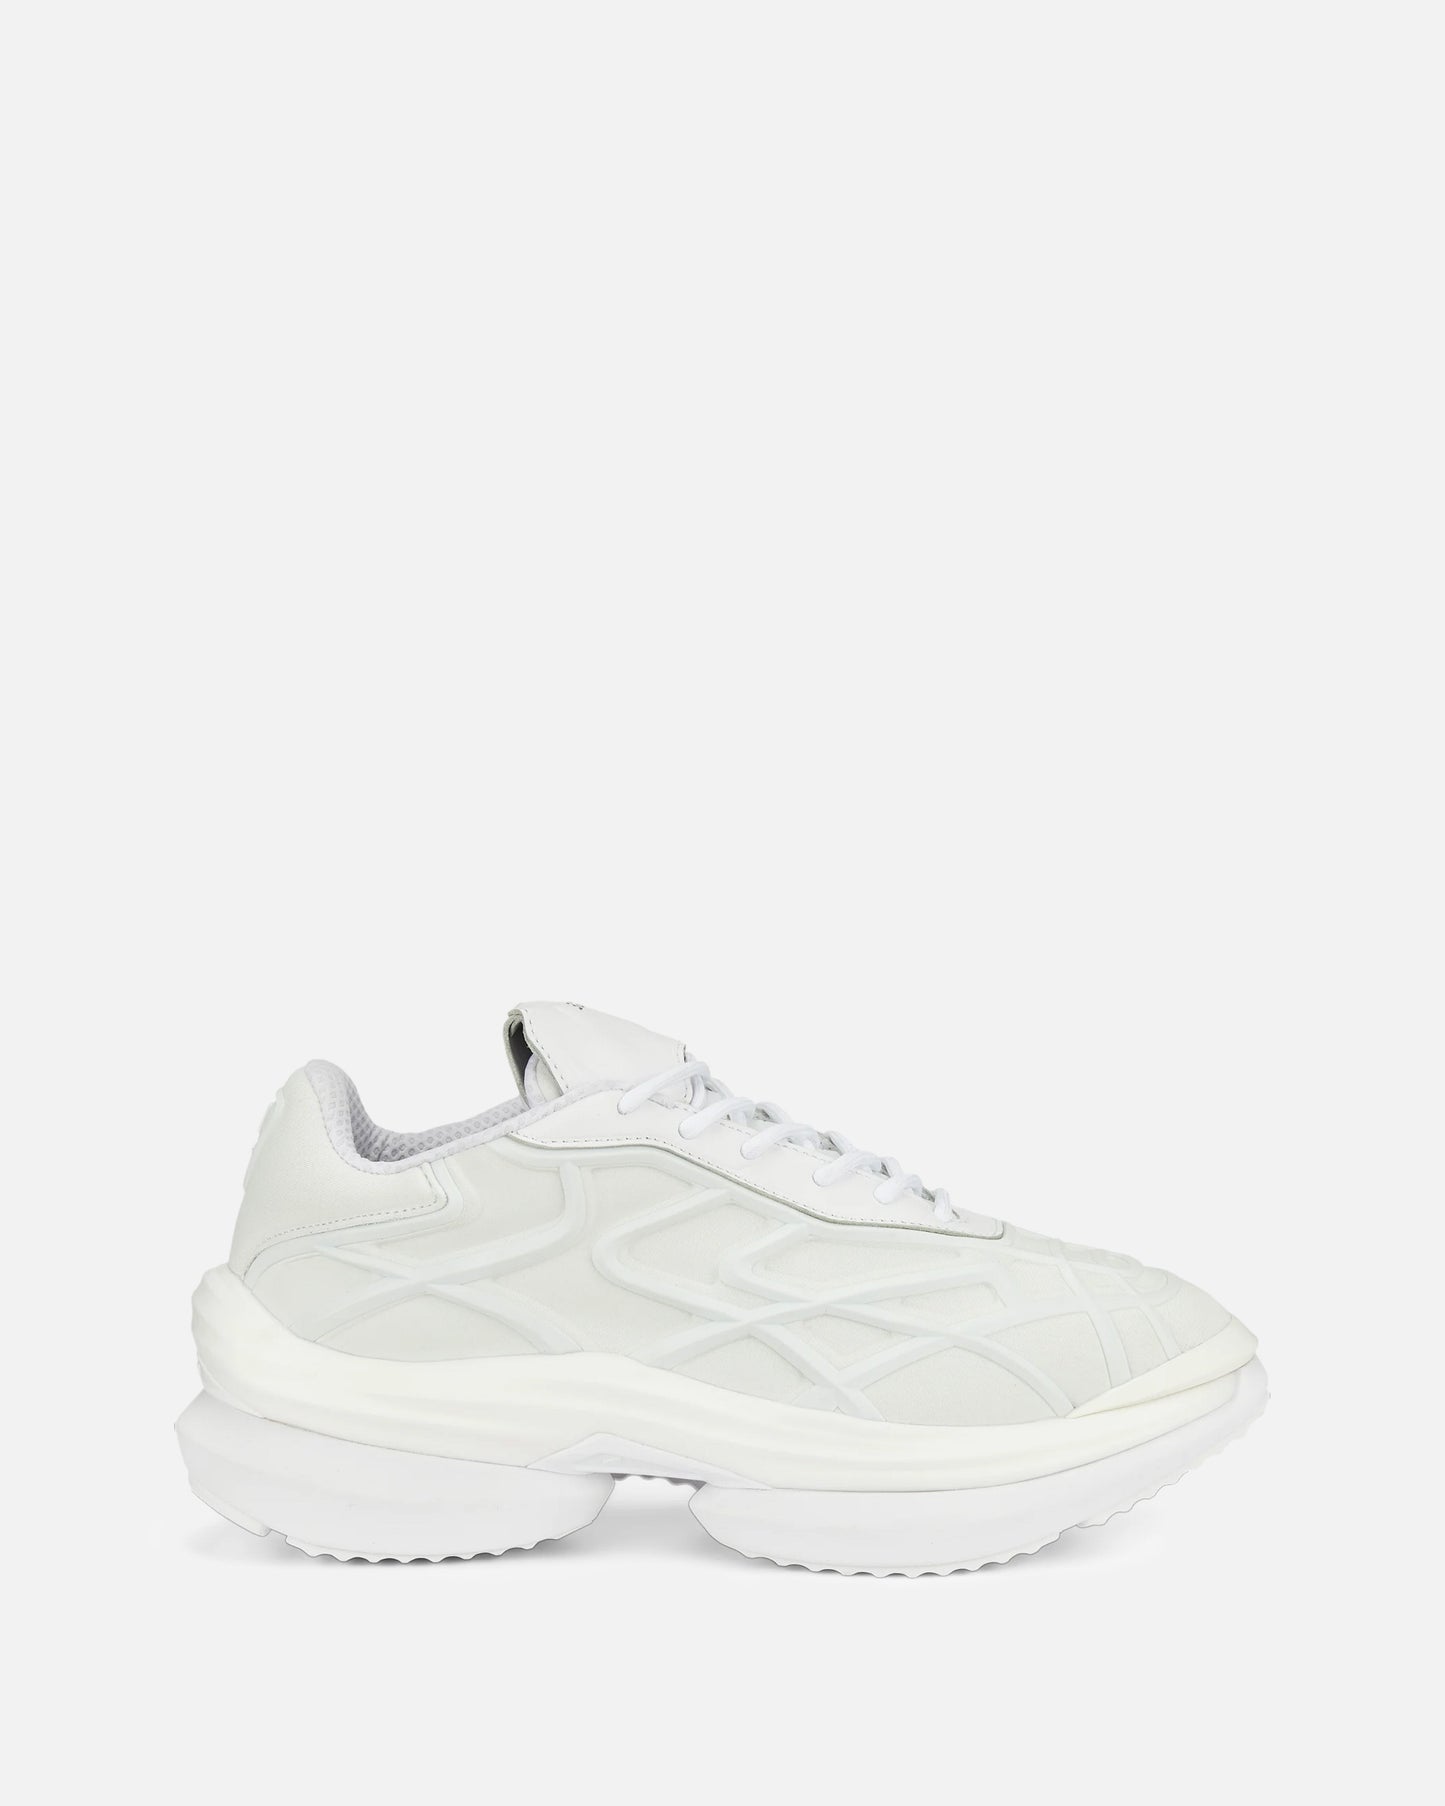 Puma Men's Sneakers Variant Nitro Andrealage XLD in Puma White